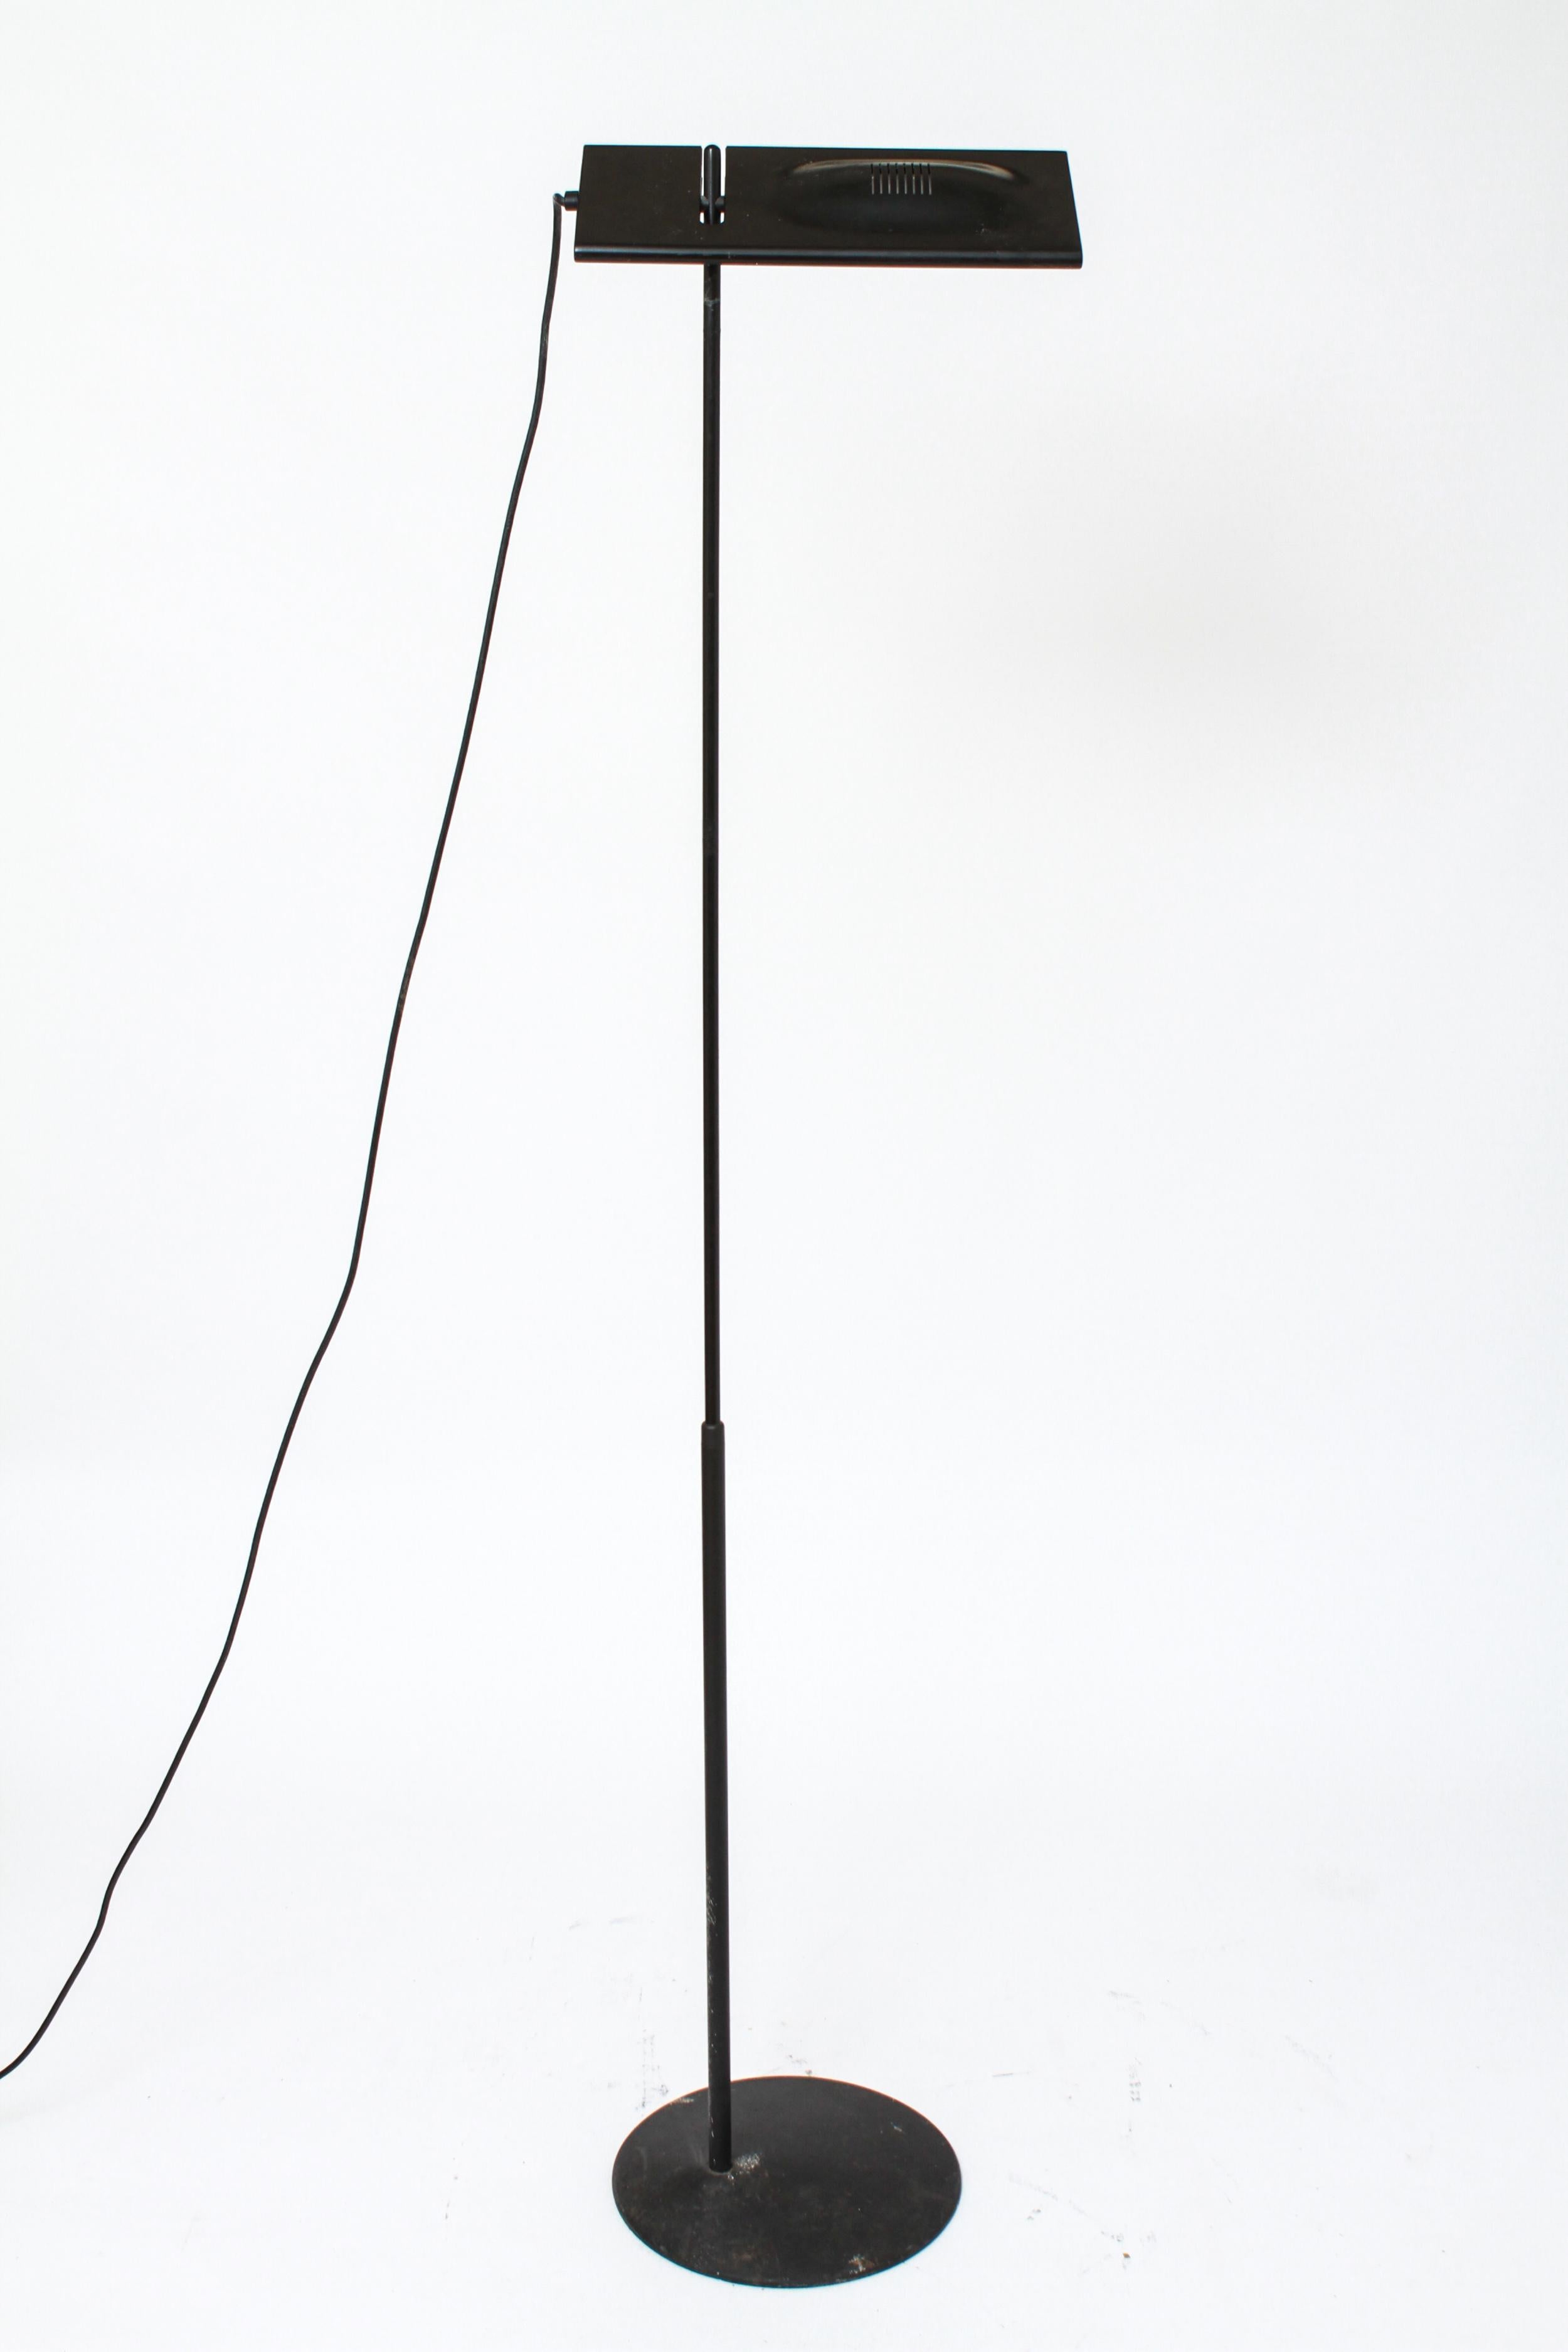 Italian modern metal floor lamp designed by Mario Barbaglia & MarCo Colombo for Italiana Luce. The model name is 